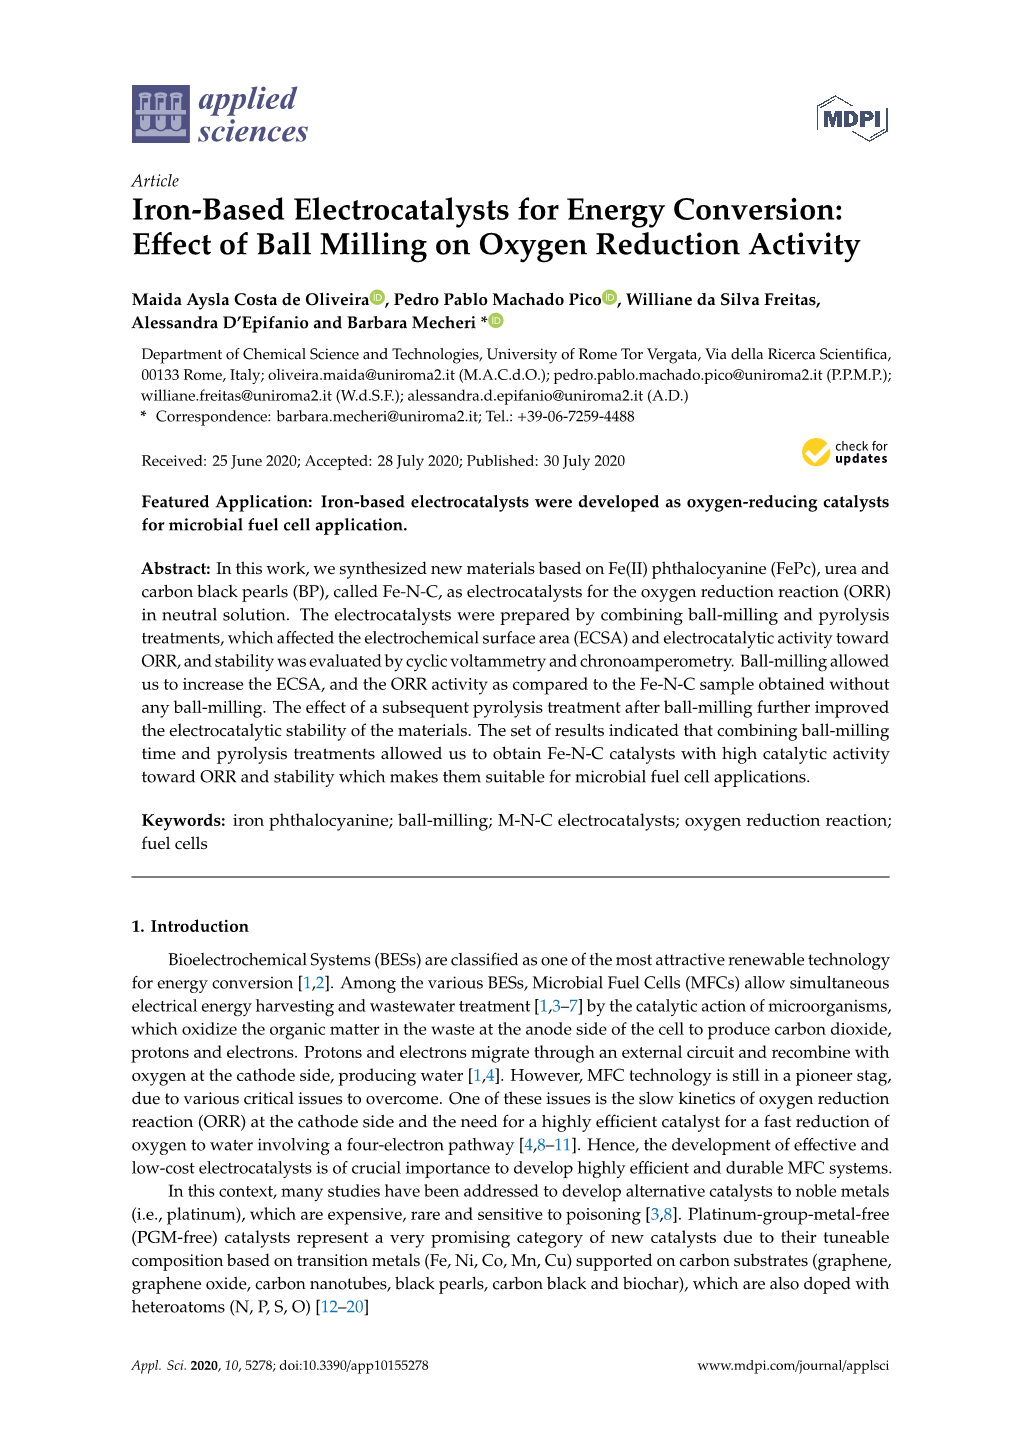 Effect of Ball Milling on Oxygen Reduction Activity